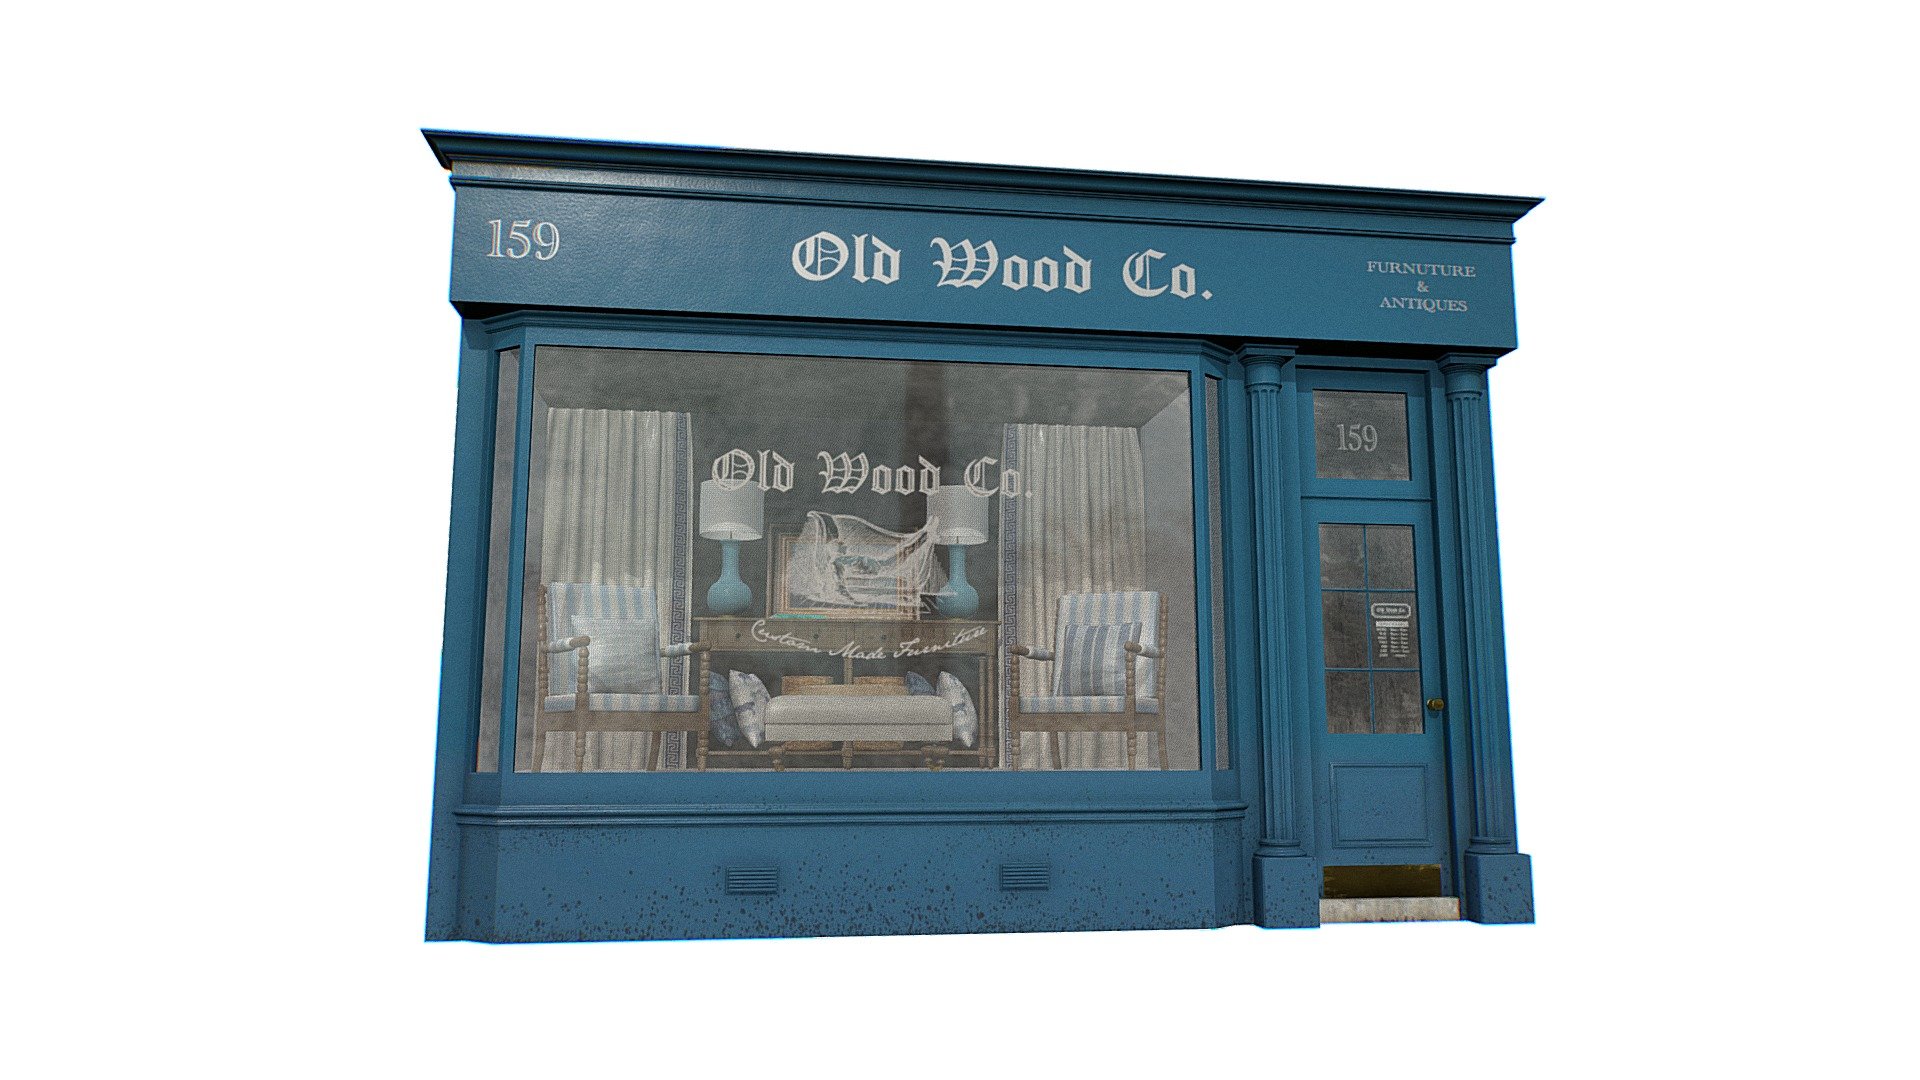 Old Furniture &amp; Antiques Store Facade 3D Model

Browse All Storefronts [Here]((https://sketchfab.com/omny3d/collections/store-facades-93ae2a1013db4ca5b7f7405f0844c9eb)

Model Includes:

American Classics Living Room Furniture Set




Wooden Chairs

Blue Ceramic Table Lights

Rug

Wooden Country Style Console

Natural Fabric Ottoman on Brass Wheels
 - Storefront Facade - Furniture & Antiques - Buy Royalty Free 3D model by Omni Studio 3D (@omny3d) 3d model